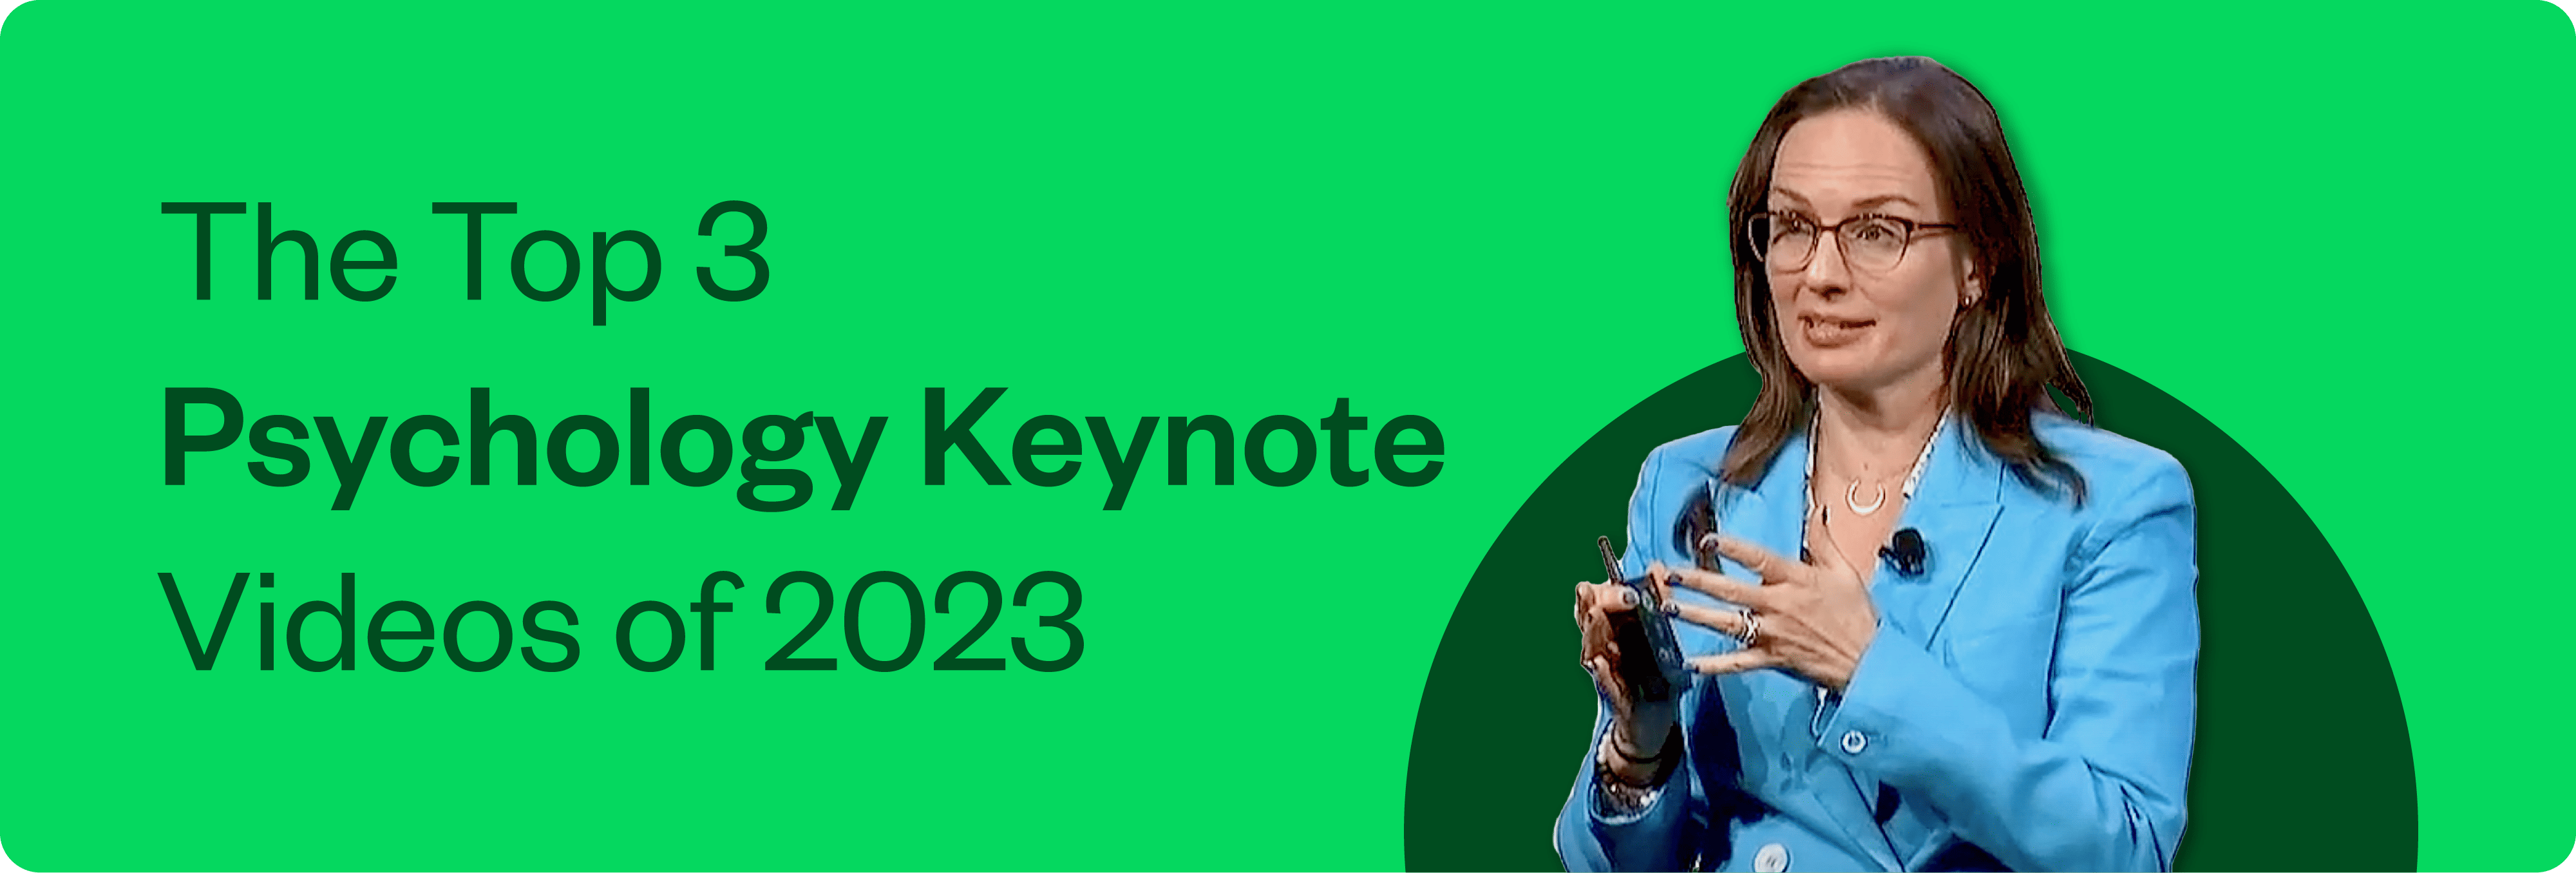 The Top 3 Psychology Keynote Videos of 2023: Getting the Best Out of Yourself and Your Teams